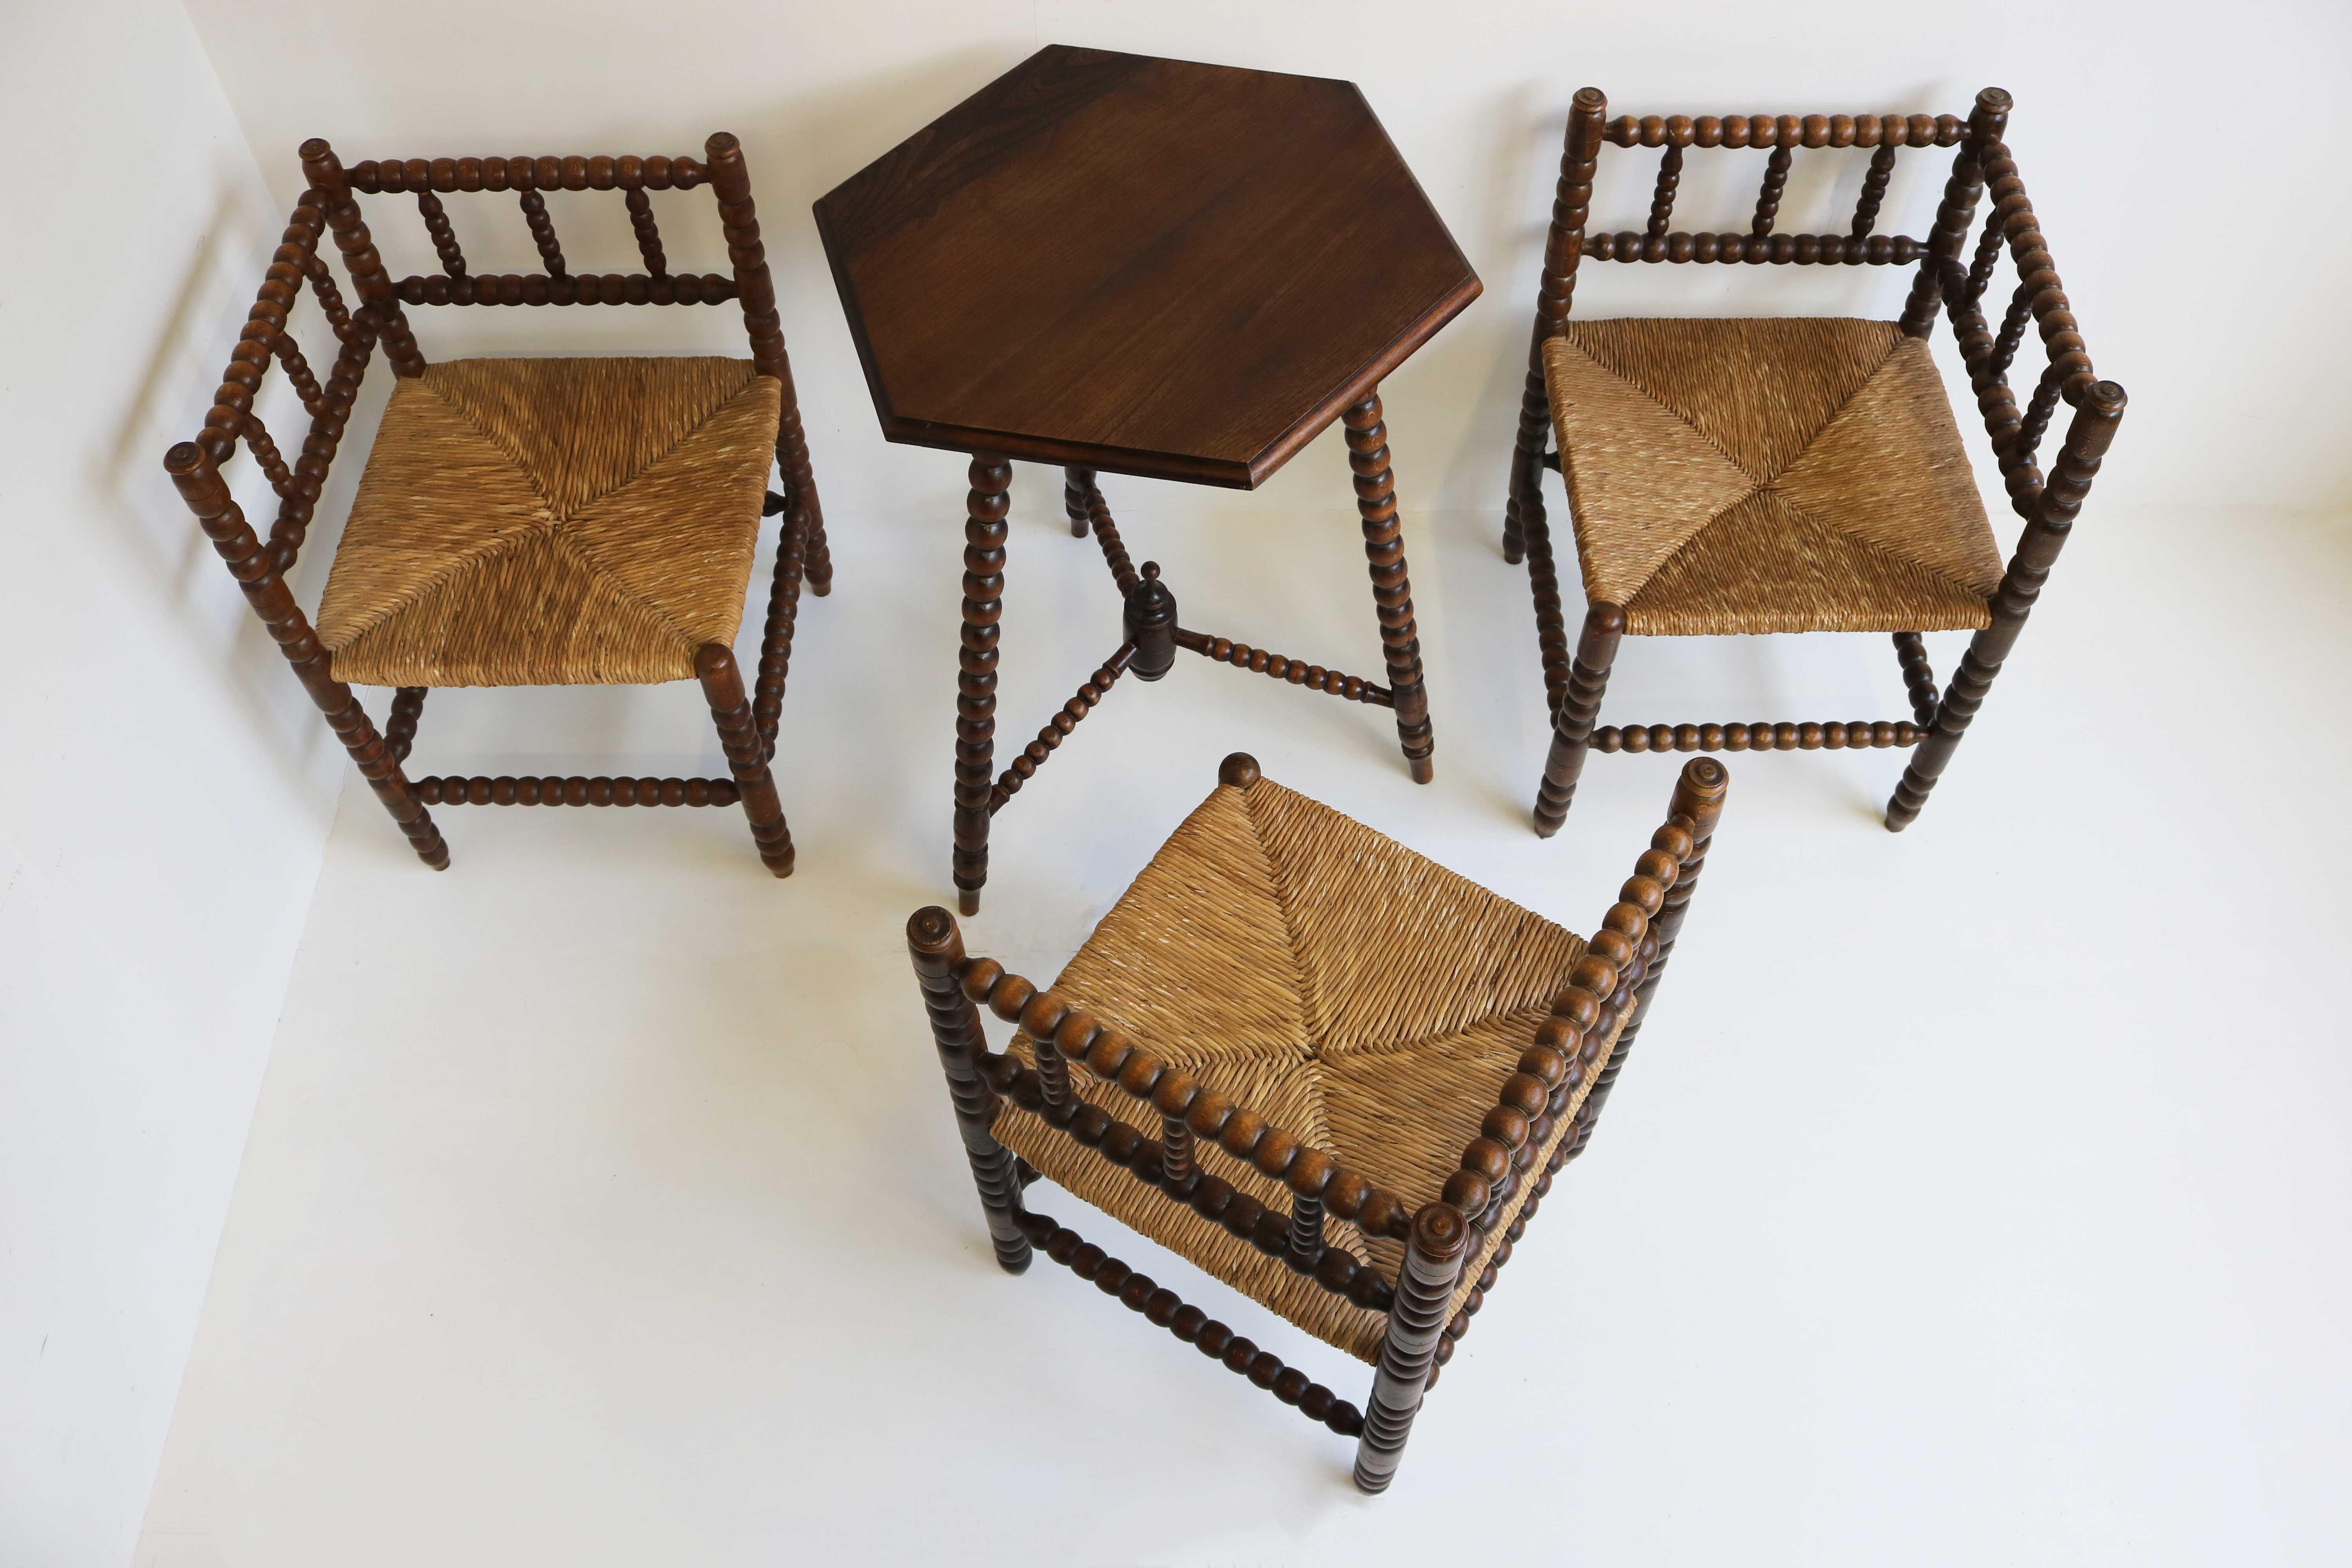 Set Of Three Antique Rush-Seat Corner Bobbin Side Knitting Chairs in Oak and Cane, With Hexagonal Side Table. Dutch, ca 1900, Country Living, Farmhouse Decor.

Lovely typical Dutch set of three knitting chairs, with three-legged hexagonal side